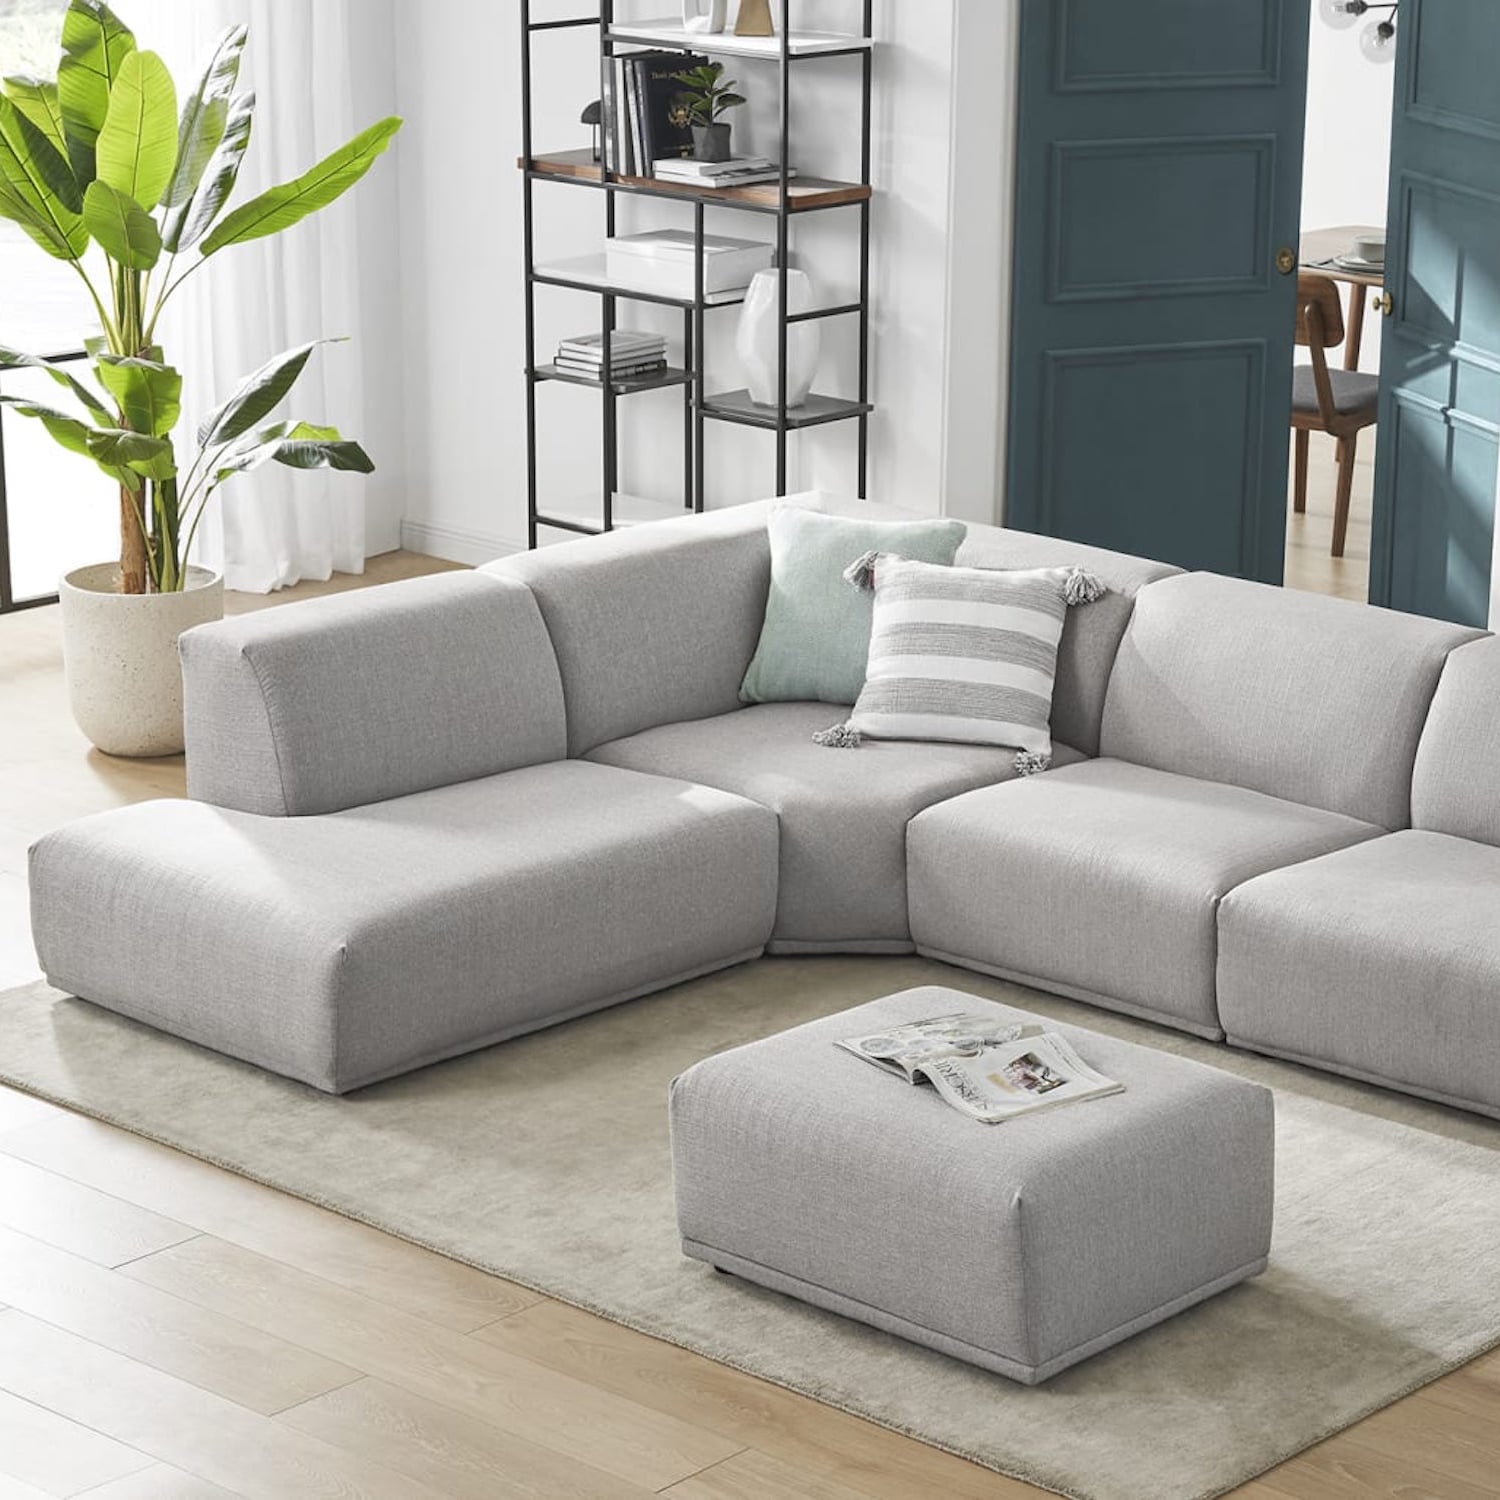 Best Sectional Sofas On Sale 2021 